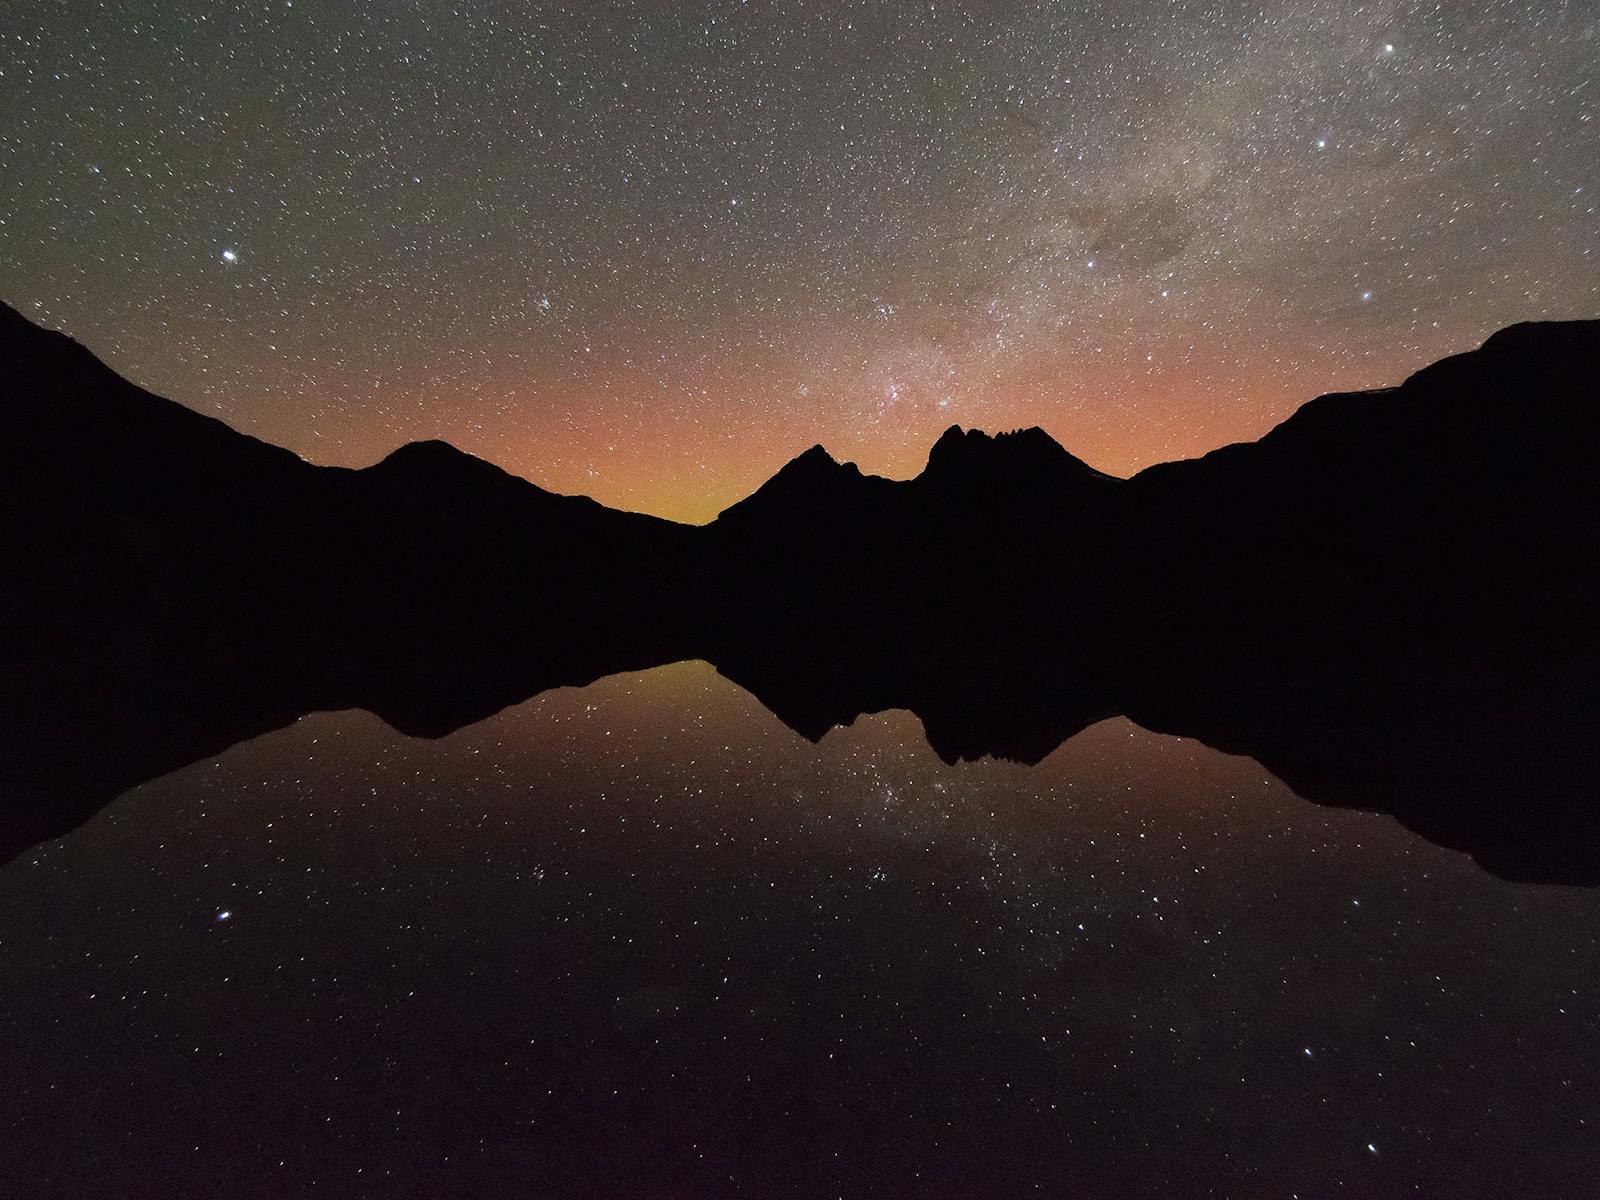 Cradle Mountain 4 day Photography Workshop, including night sky sessions!